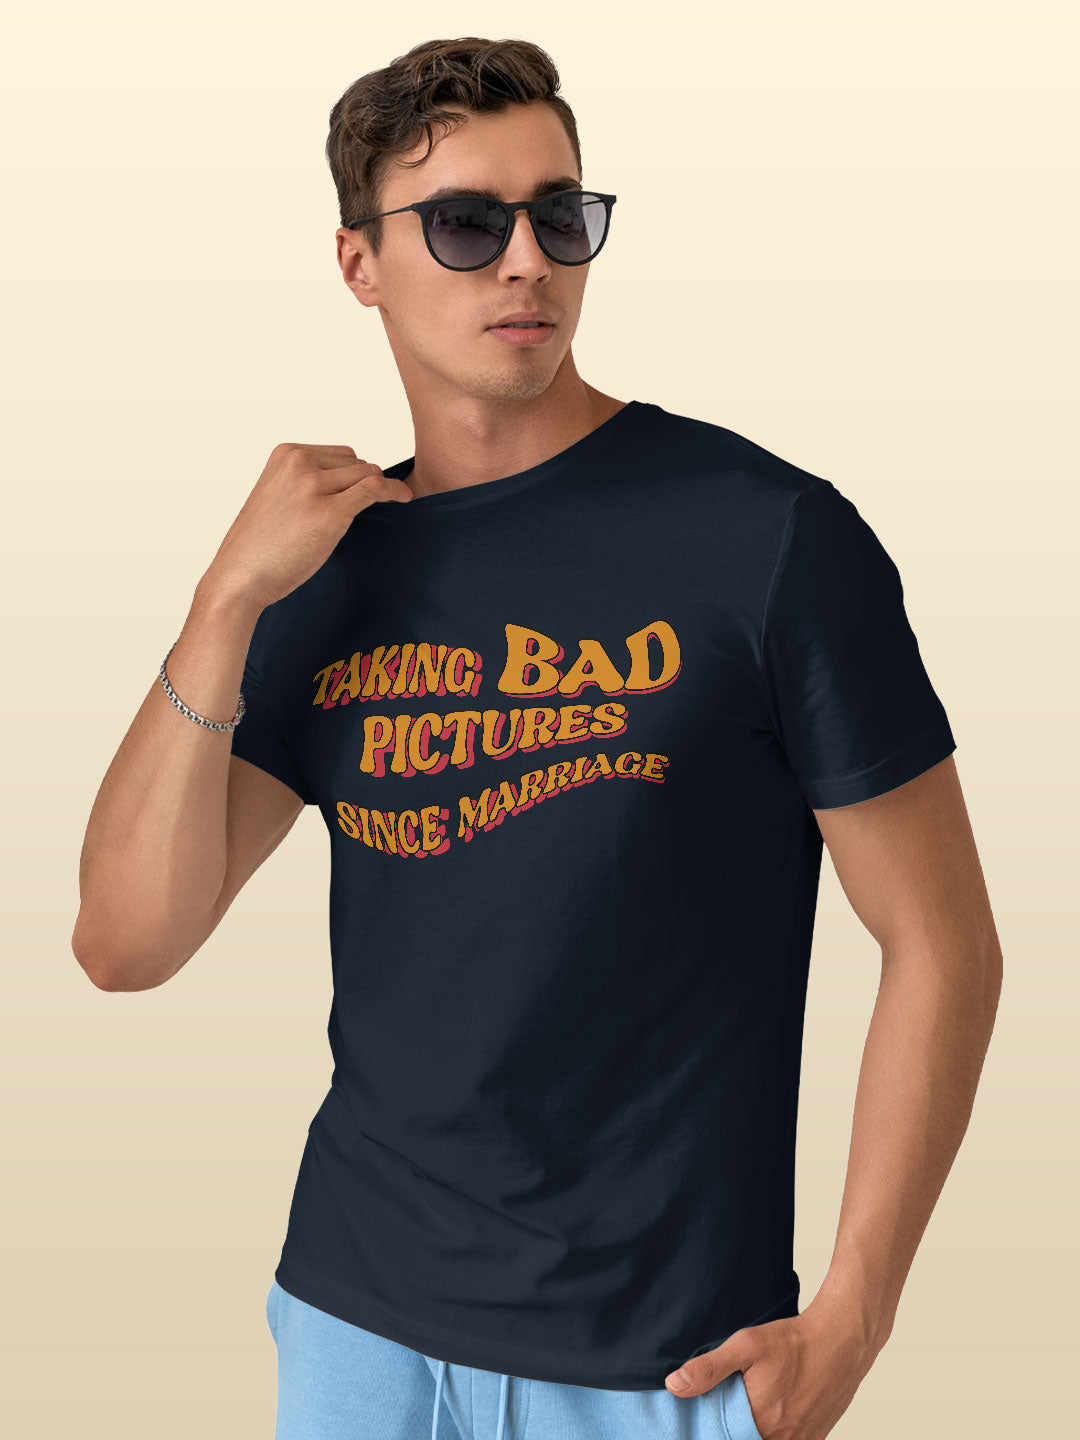 Bad Picture since Marriage - Tshirt